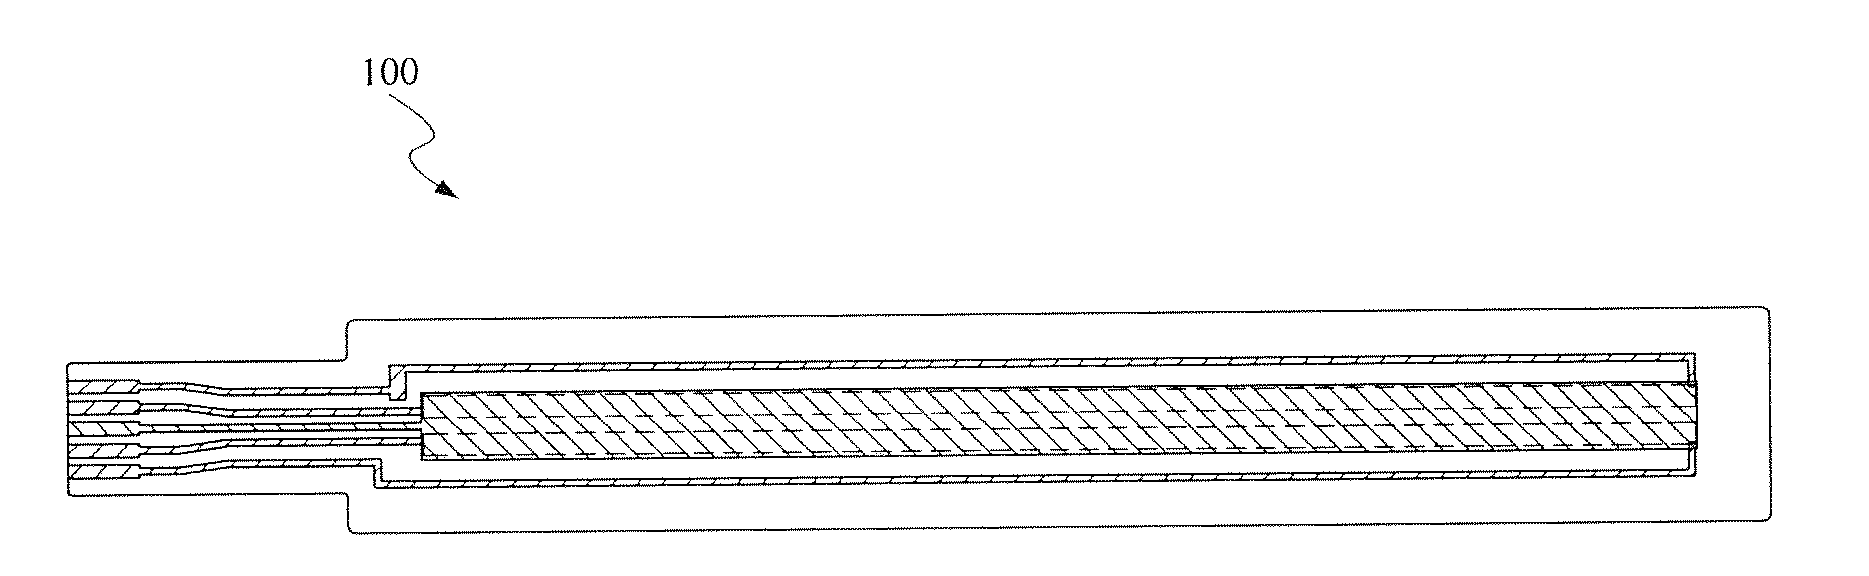 Touch-type variable resistor structure